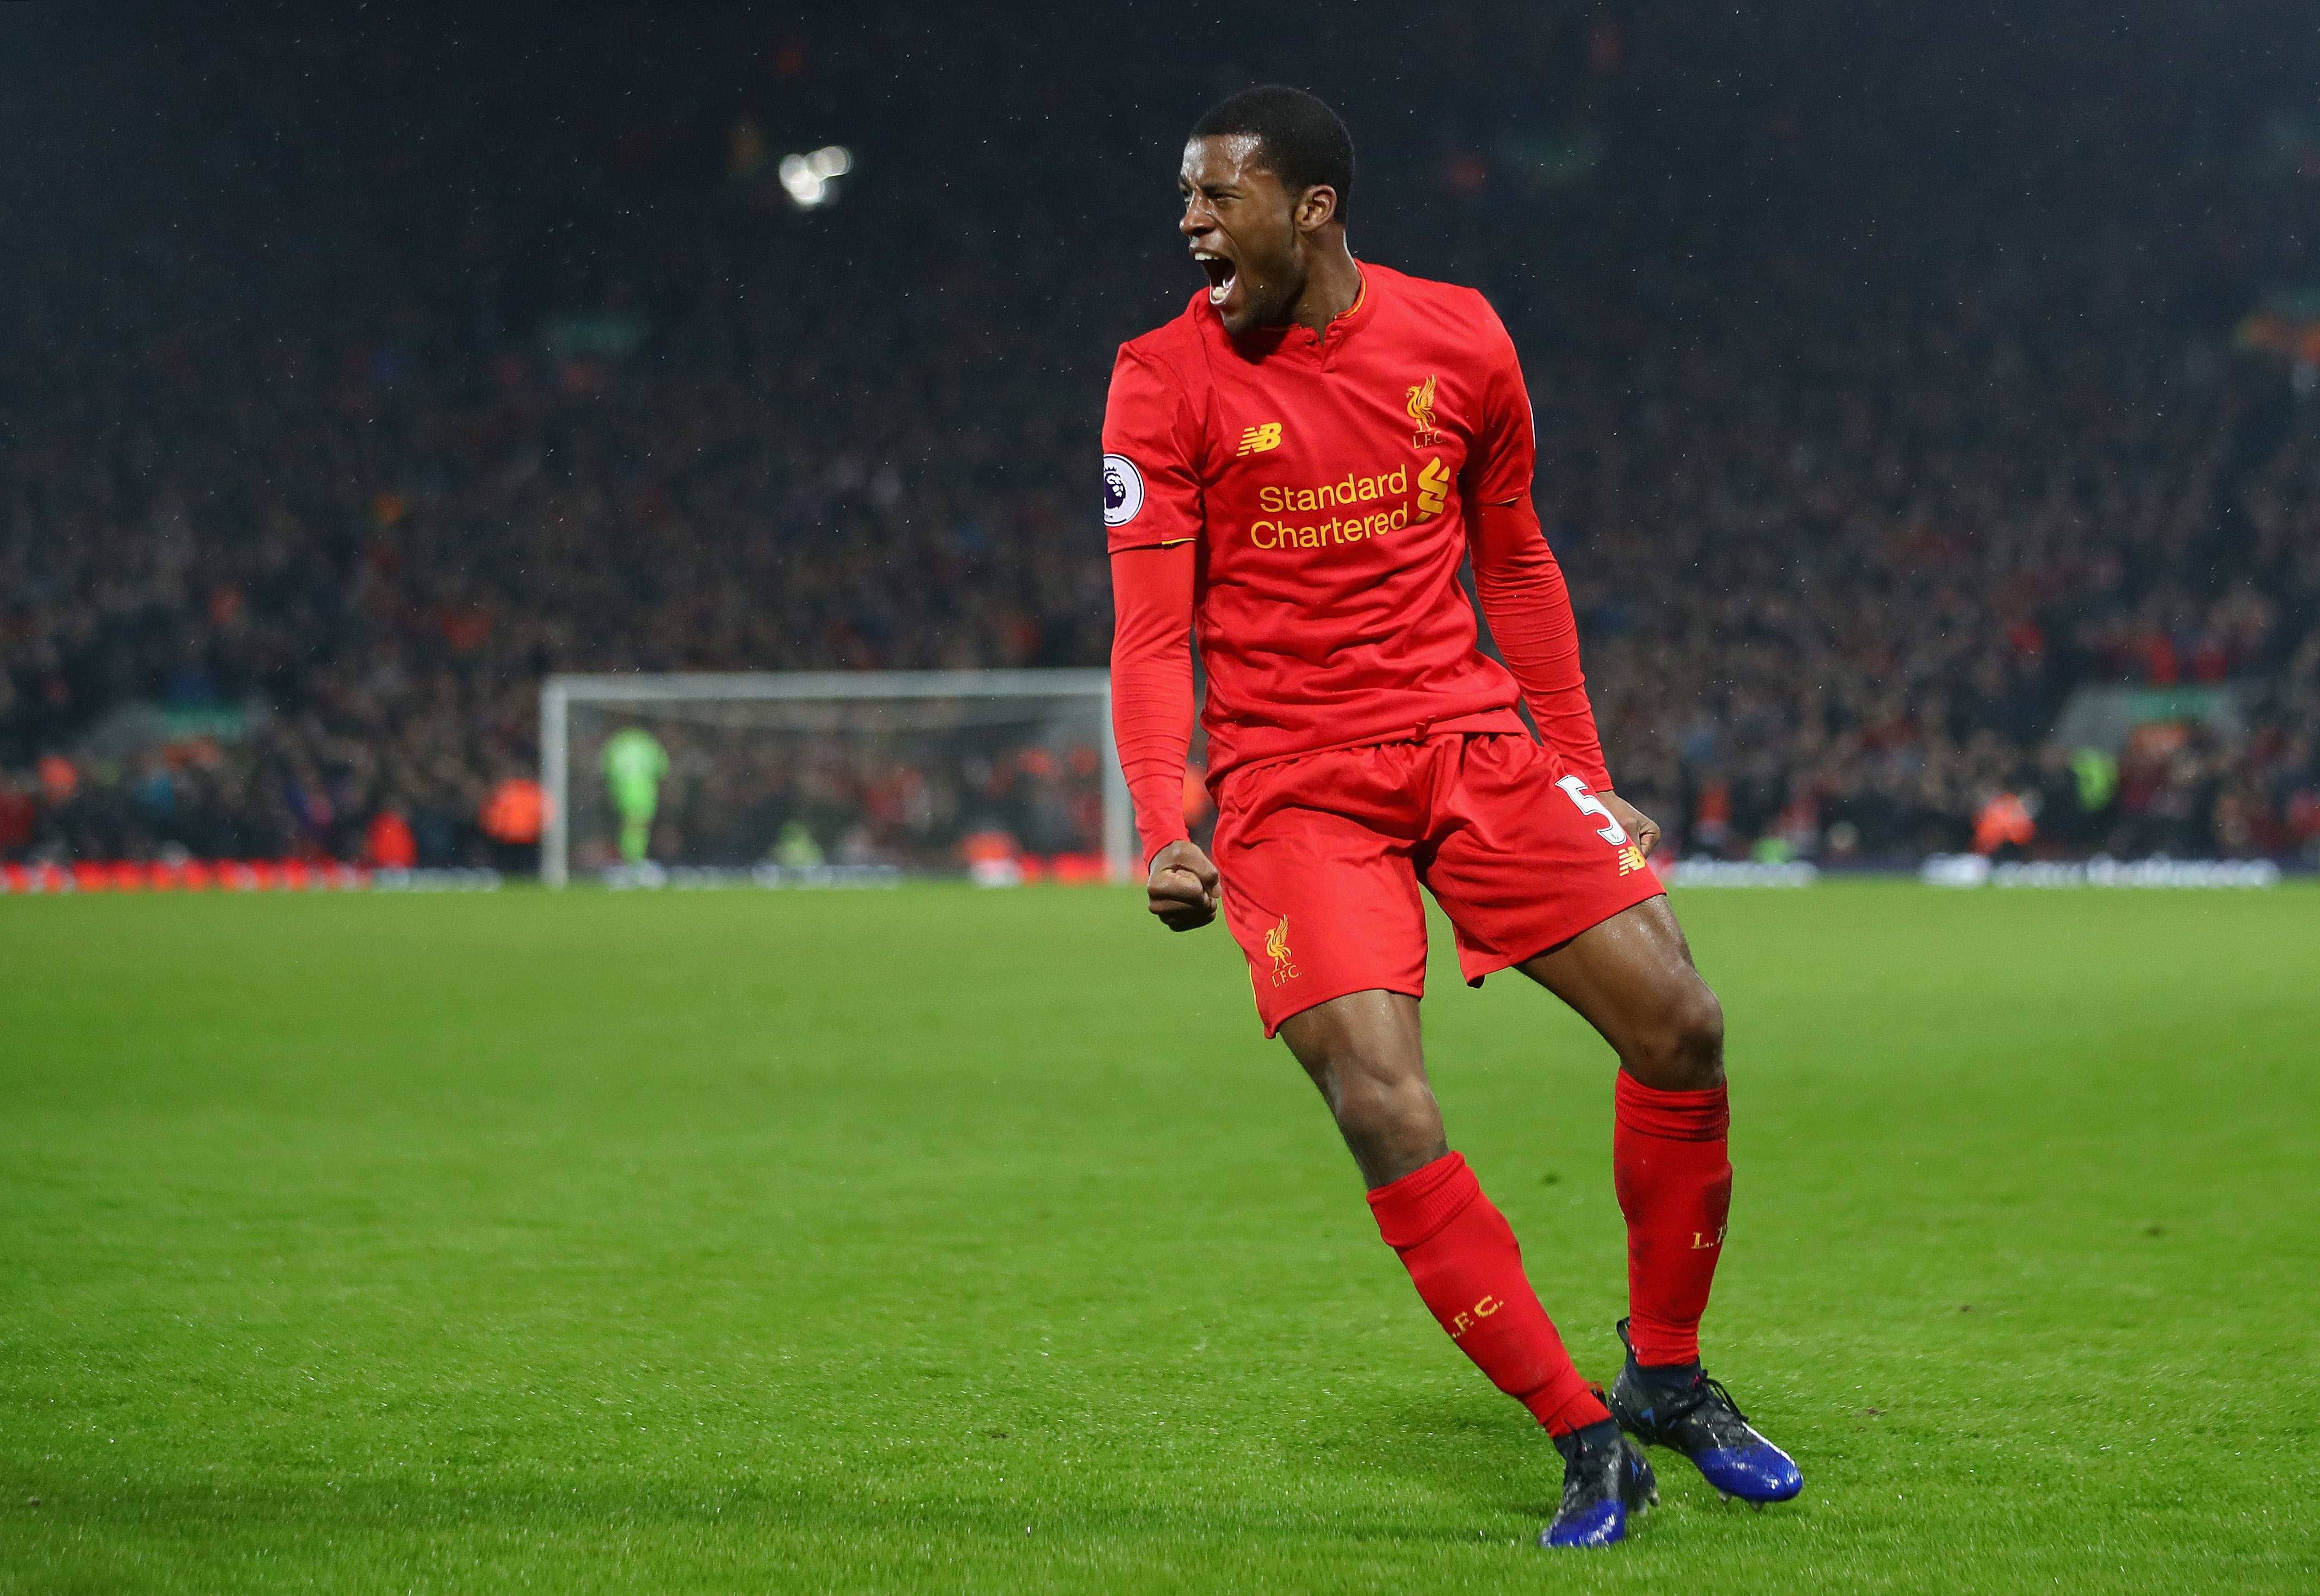 LIVERPOOL, ENGLAND - JANUARY 31:  Georginio Wijnaldum of Liverpool celebrates scoring his side's first goal to make it 1-1 during the Premier League match between Liverpool and Chelsea at Anfield on January 31, 2017 in Liverpool, England.  (Photo by Clive Mason/Getty Images)